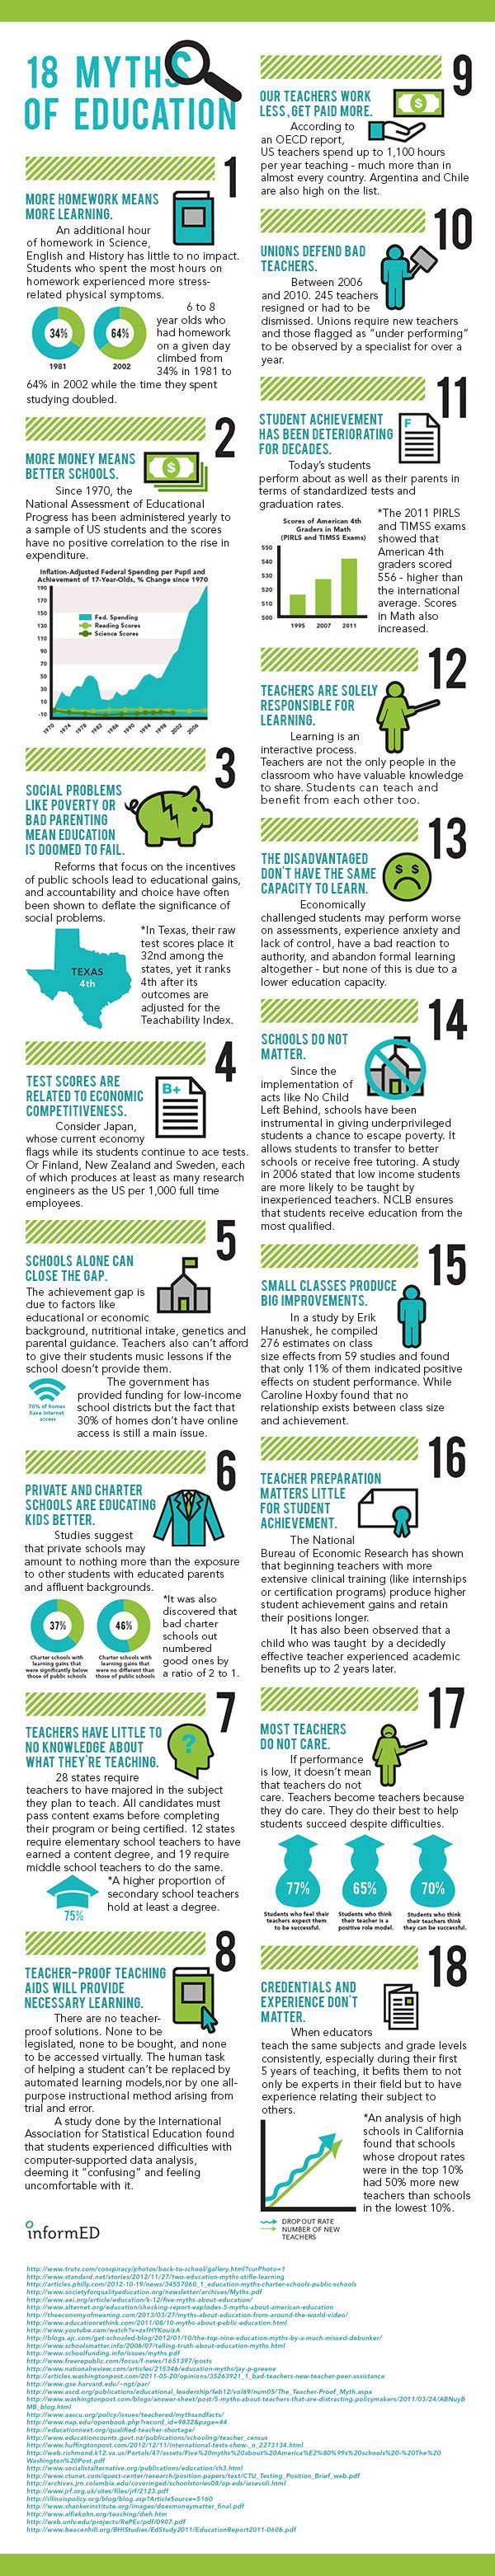 18 Myths of Education Infographic